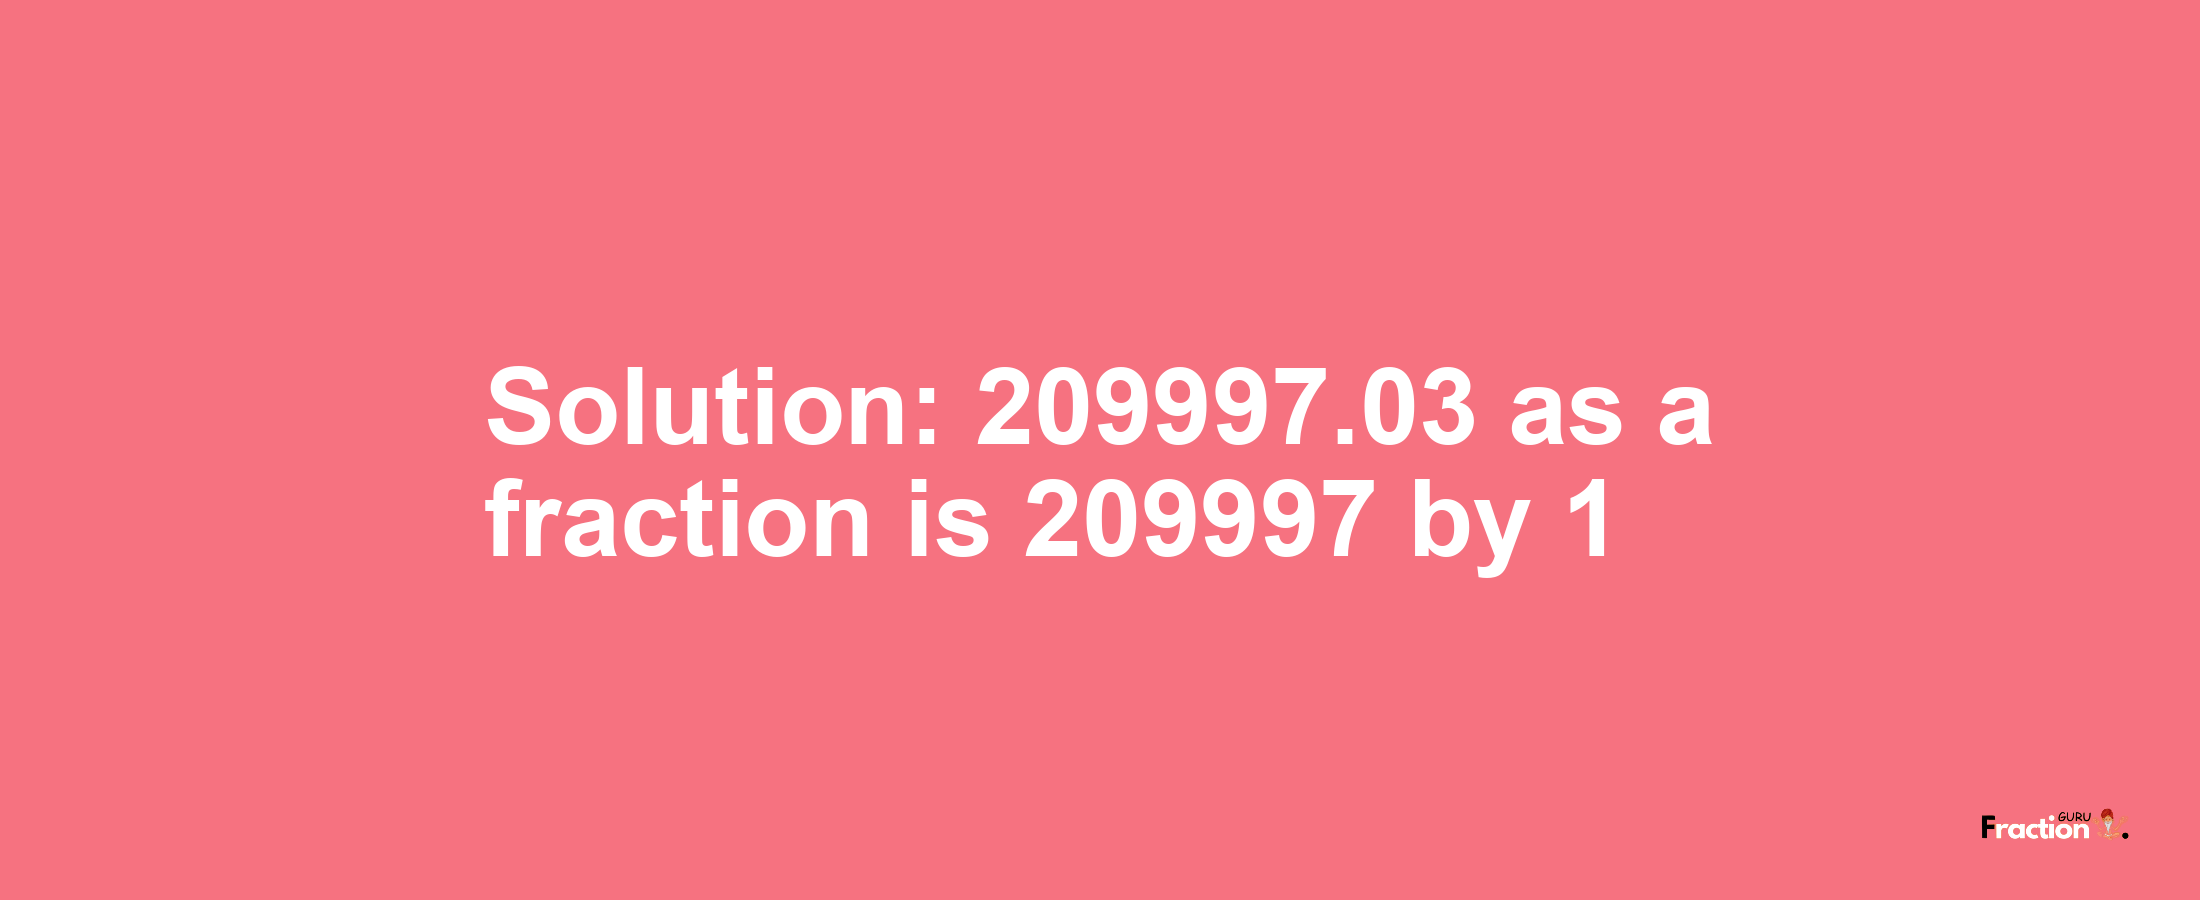 Solution:209997.03 as a fraction is 209997/1